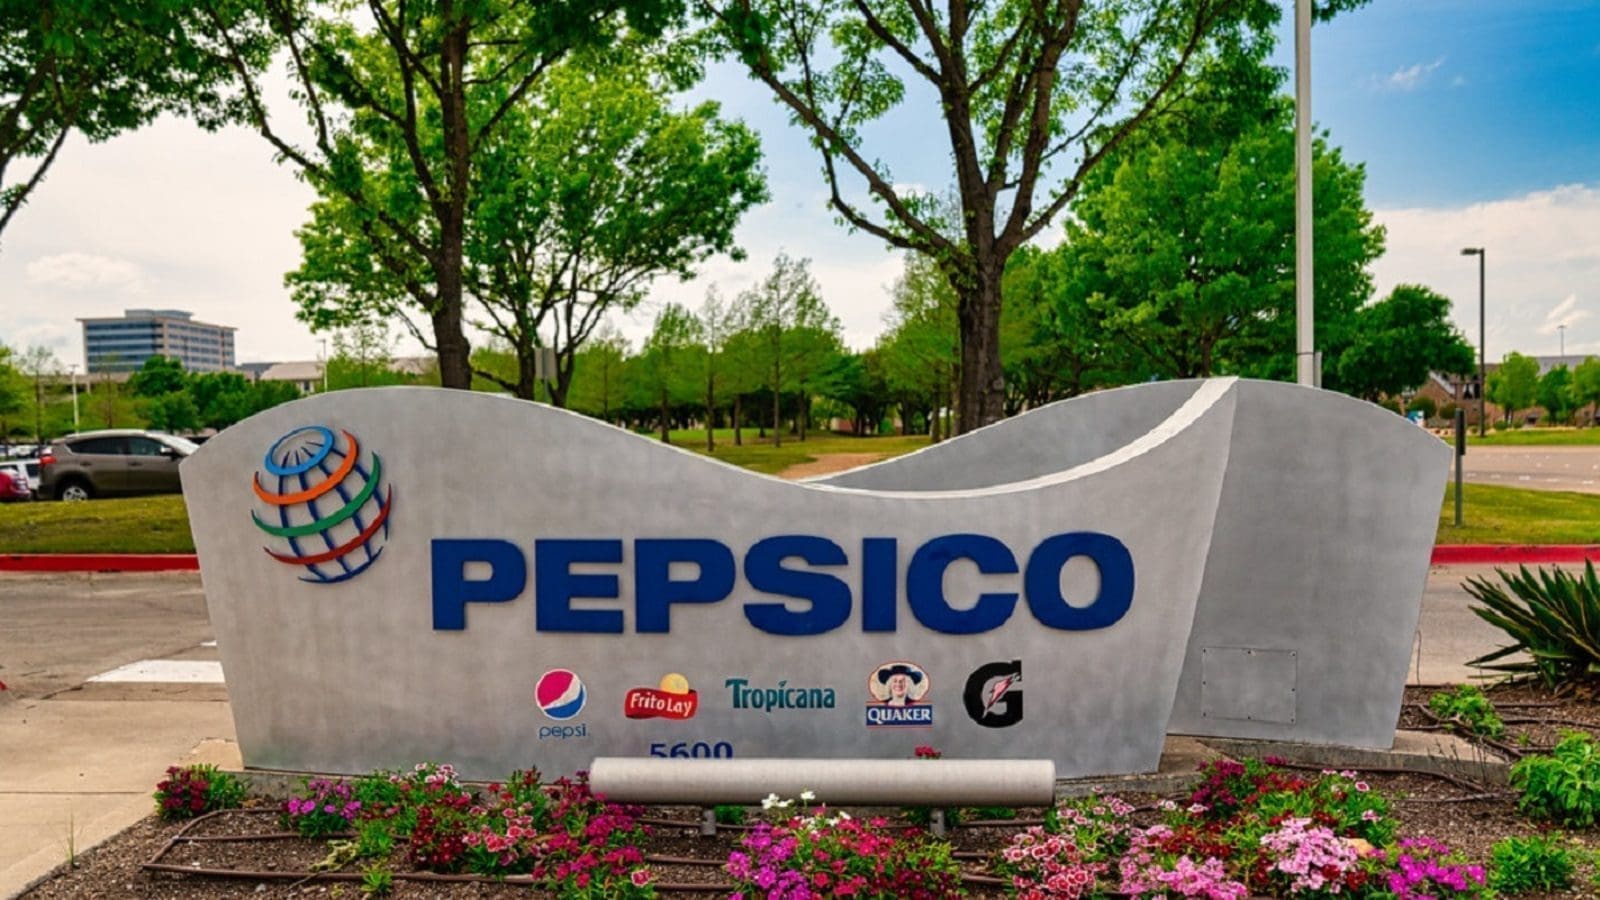 PepsiCo AMESA revenues decline 8% in Q2 as group earnings surpass analyst expectation